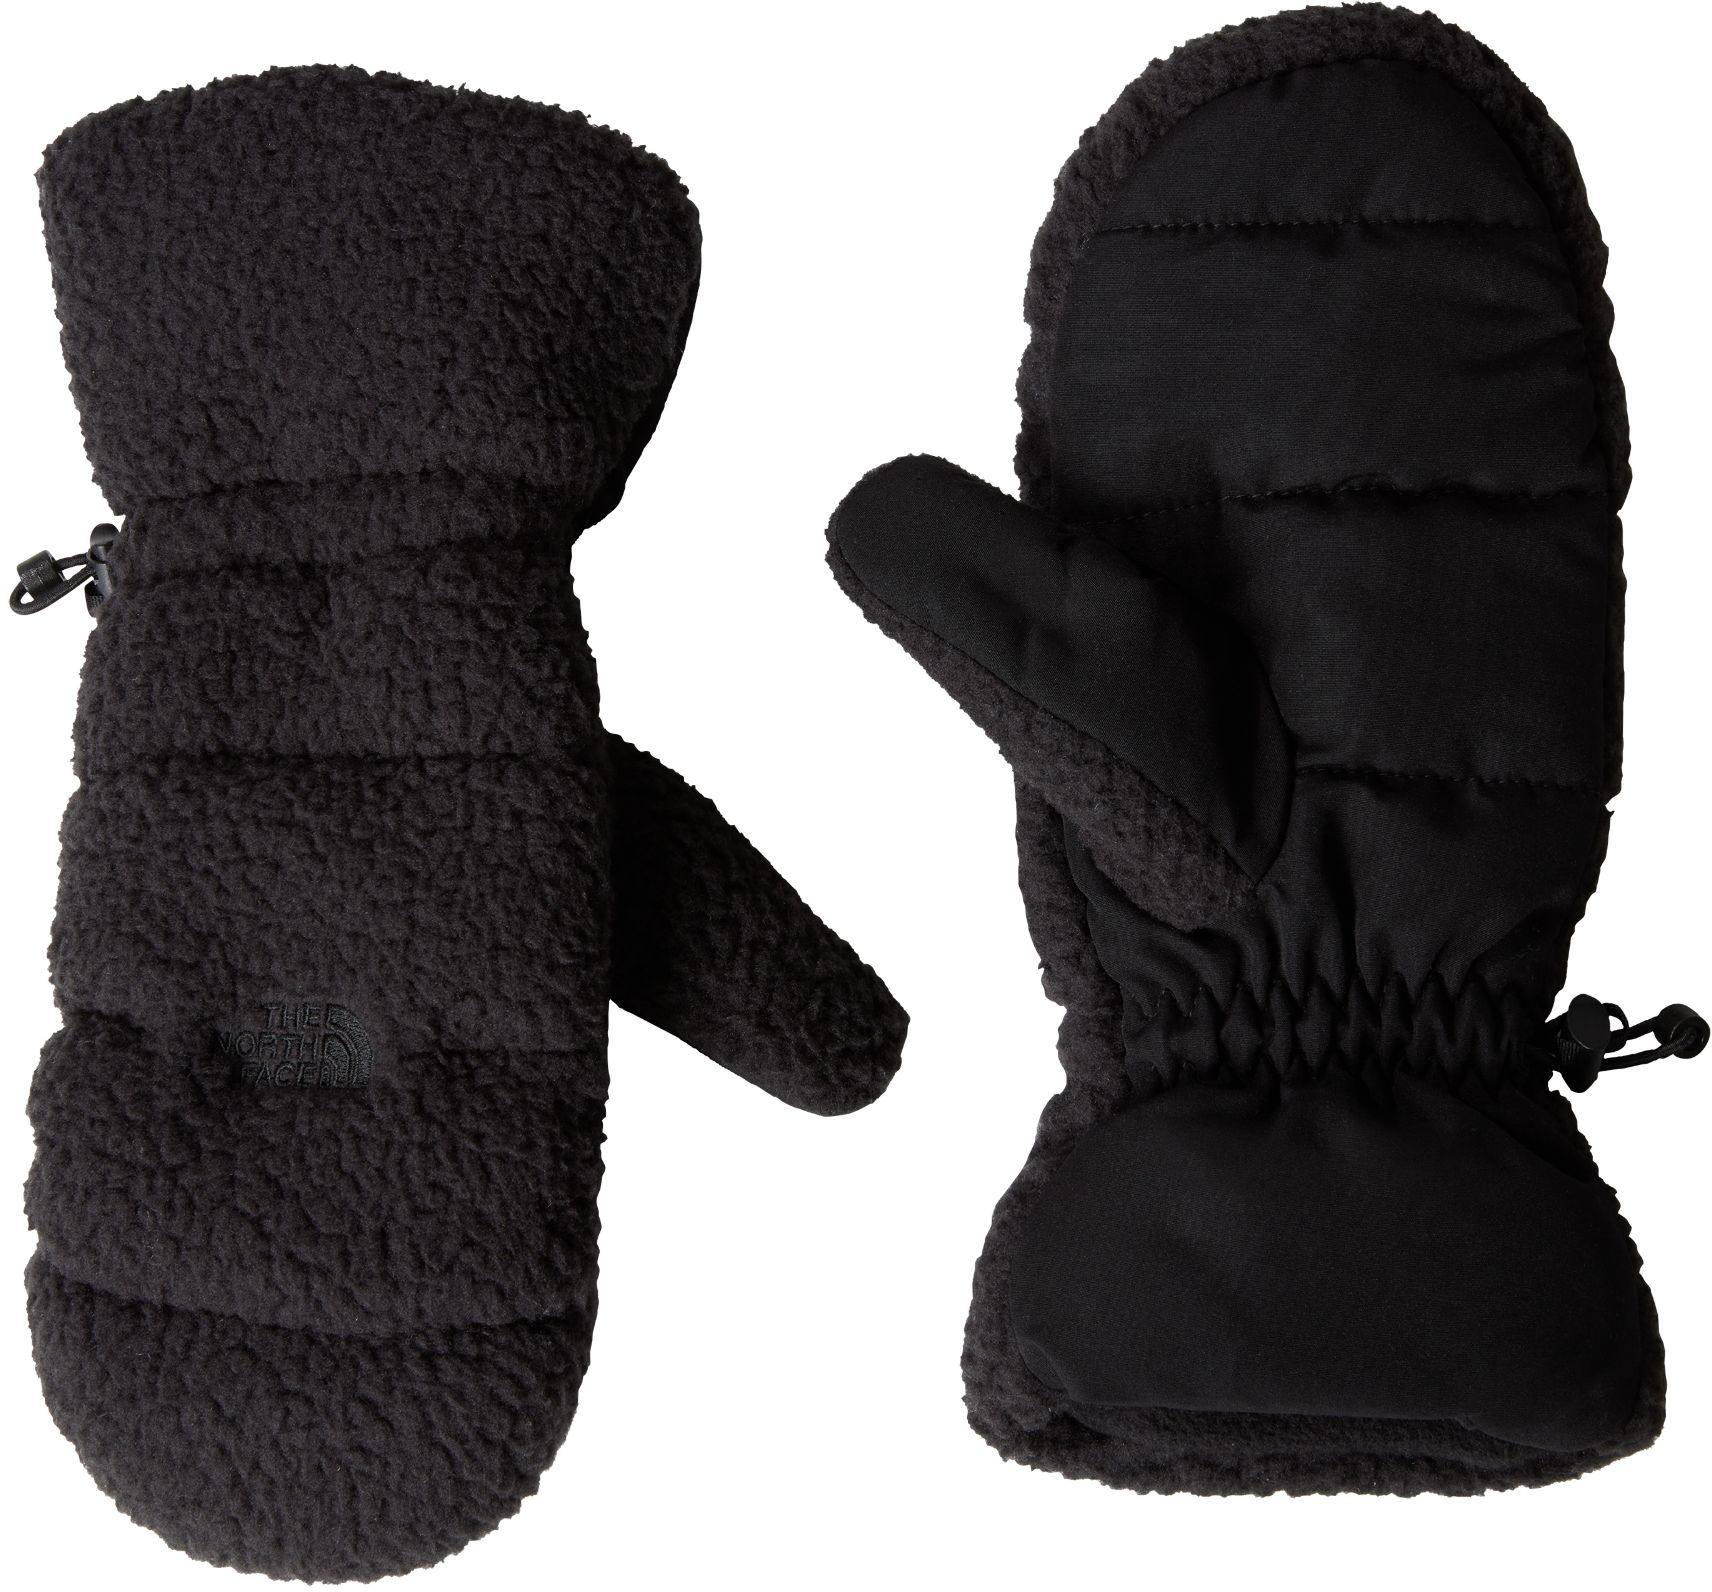 The North Face Cragmont Fleece Mitts